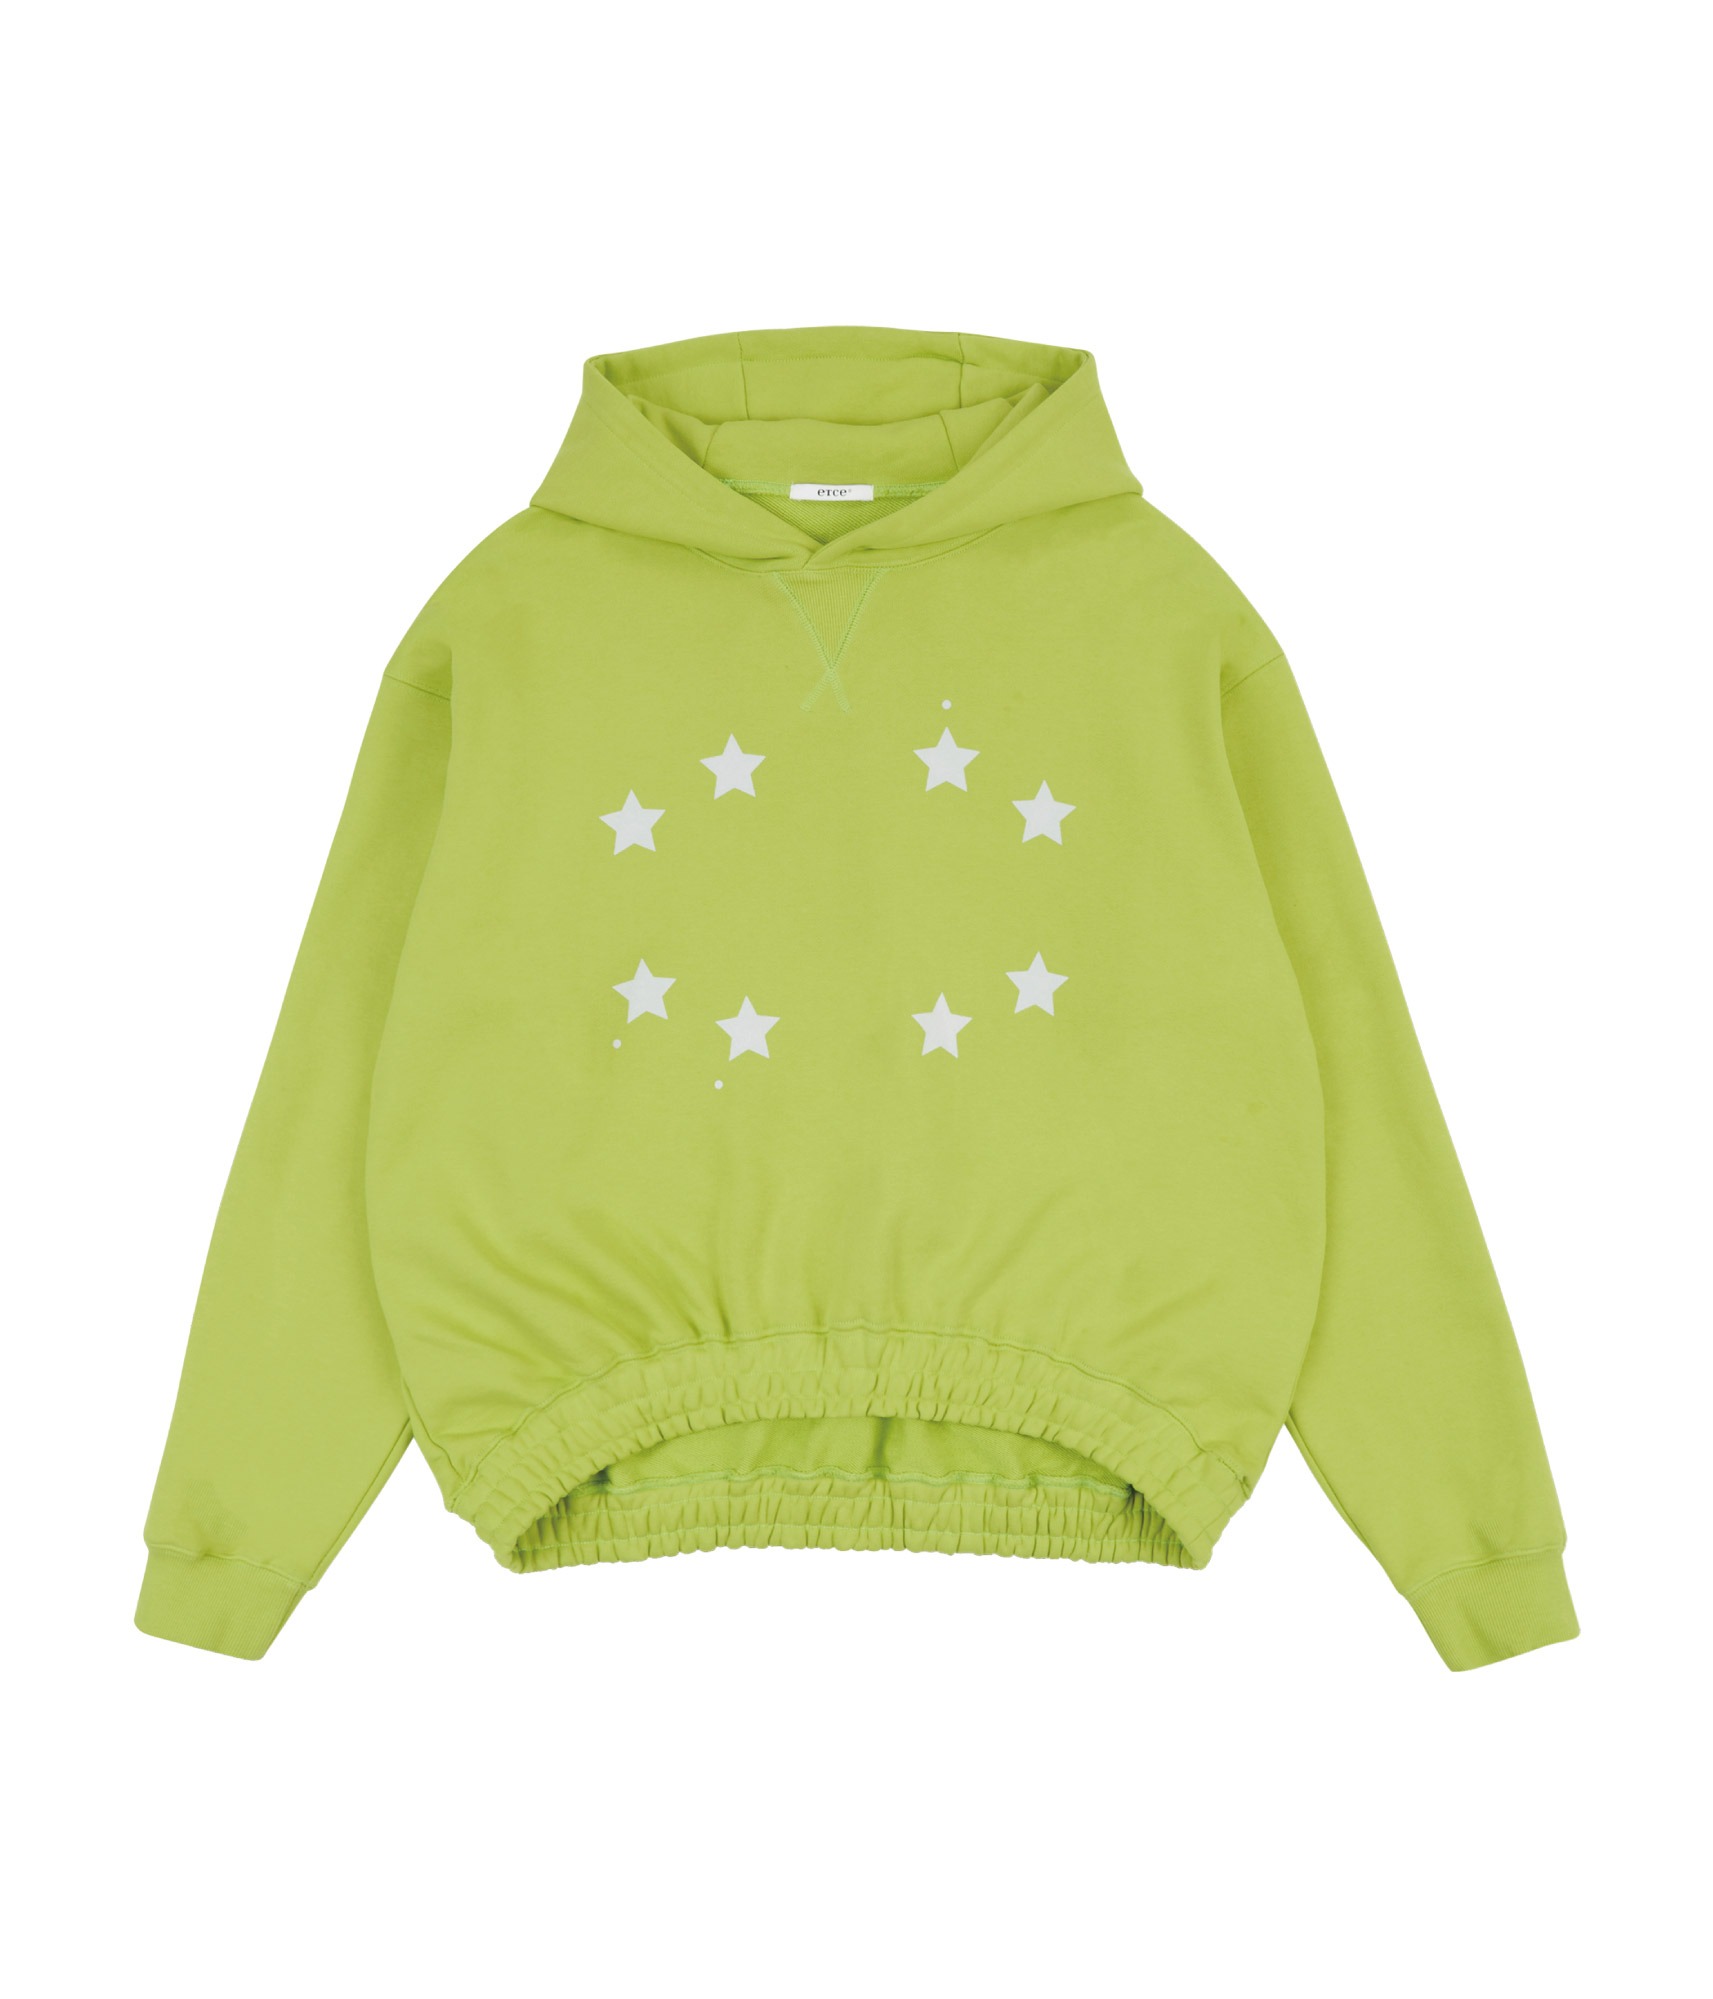 STAR PRINT ARCH HOODIE (LIME YELLOW)